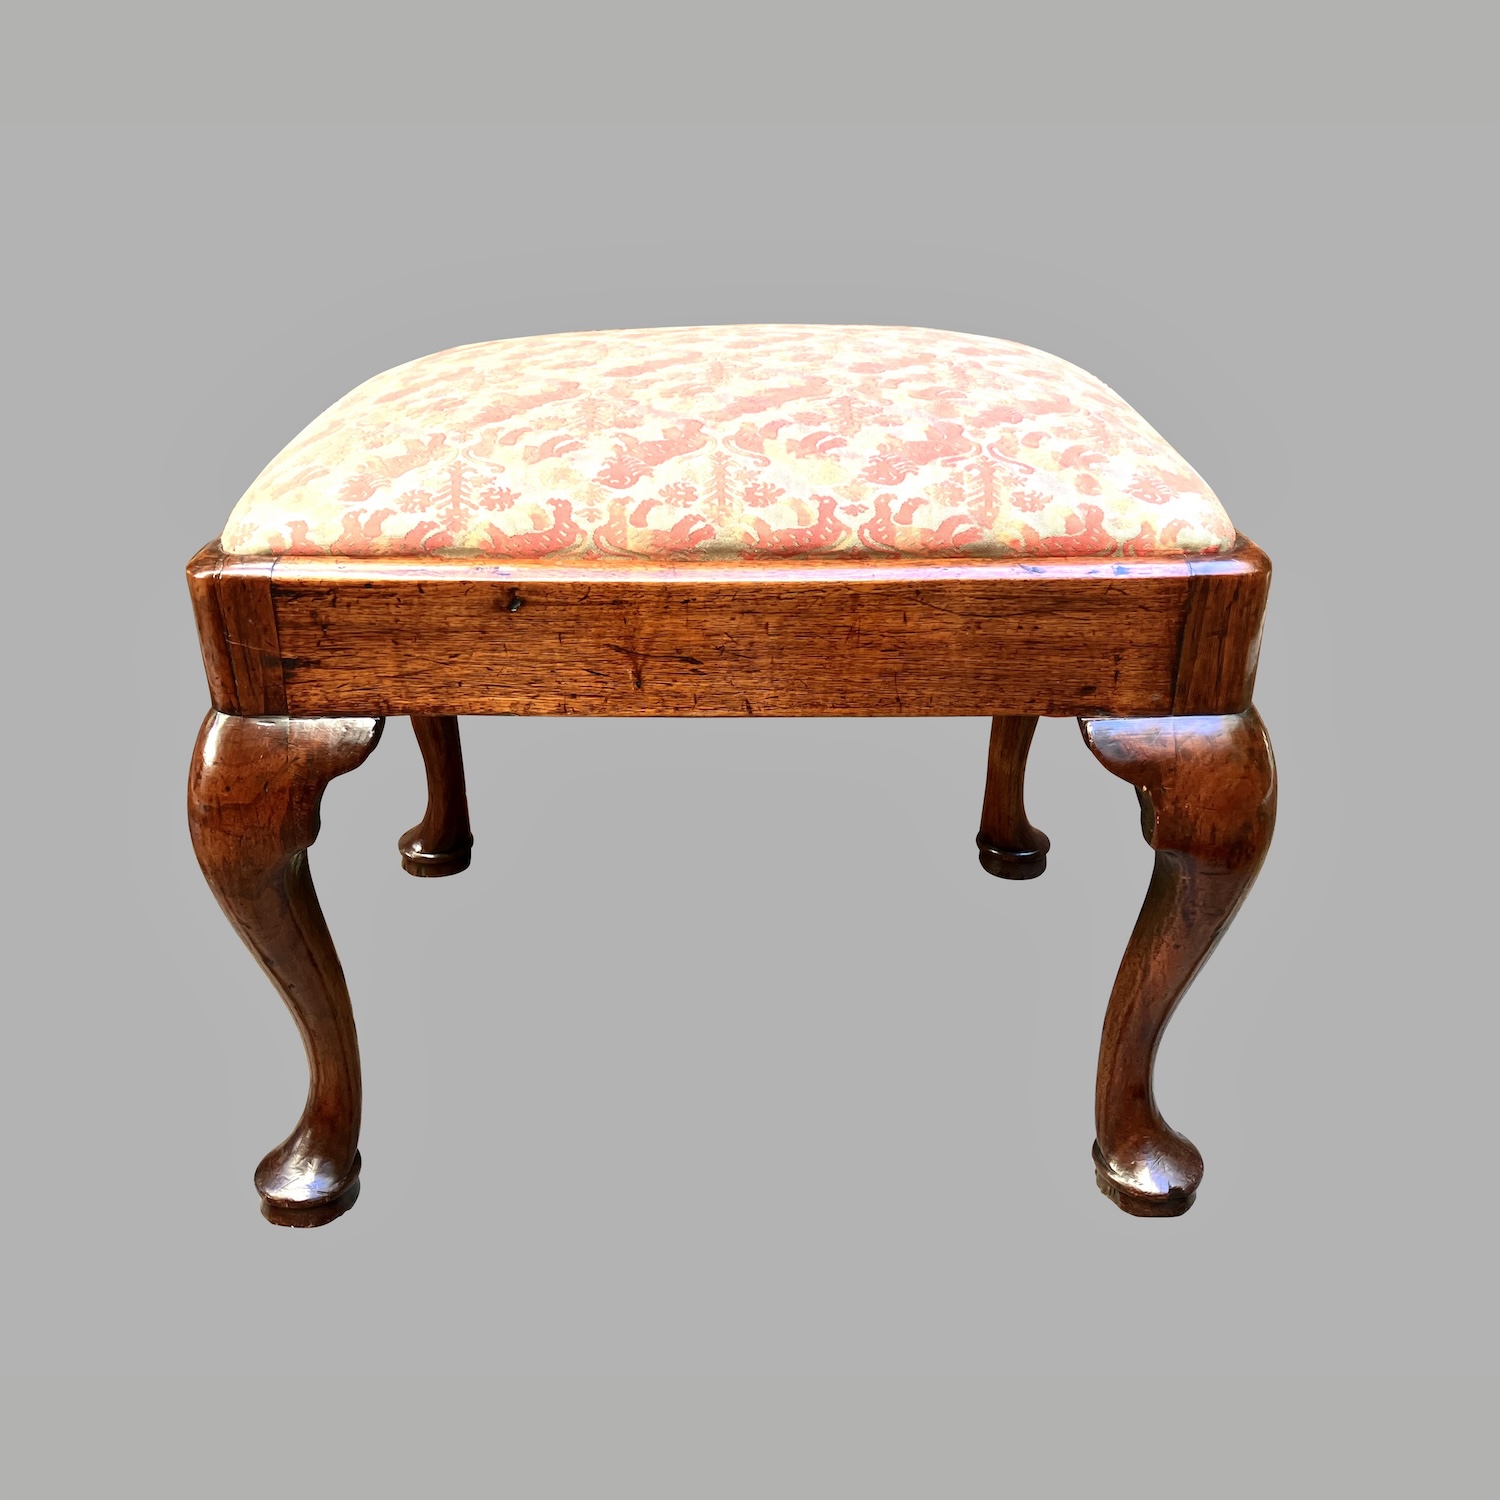 english-george-i-period-small-mahogany-bench-now-upholstered-fortuny-fabric-c723-20